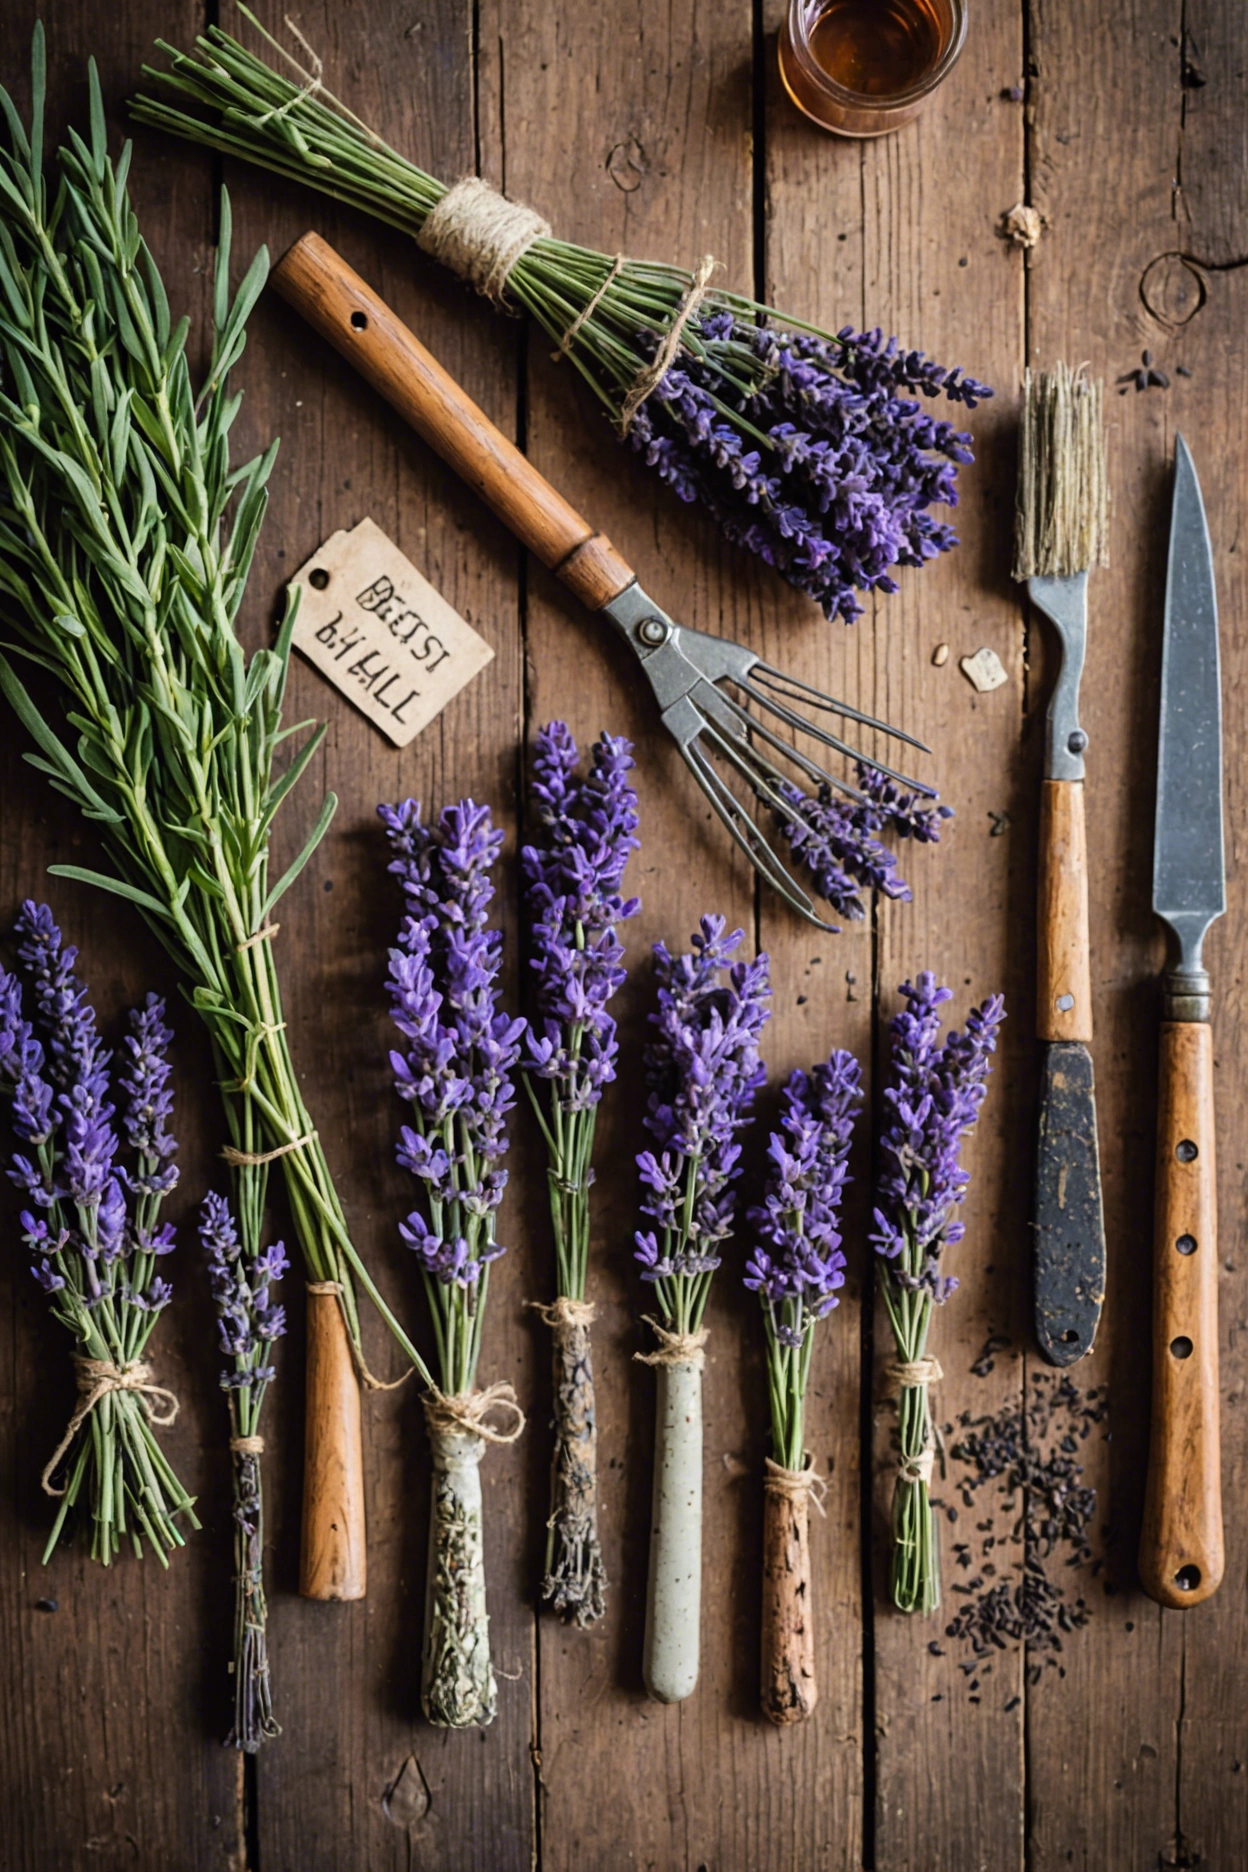 "Different lavender varieties on a rustic table with tags, garden shears, rooting hormone powder, and pots for propagation."